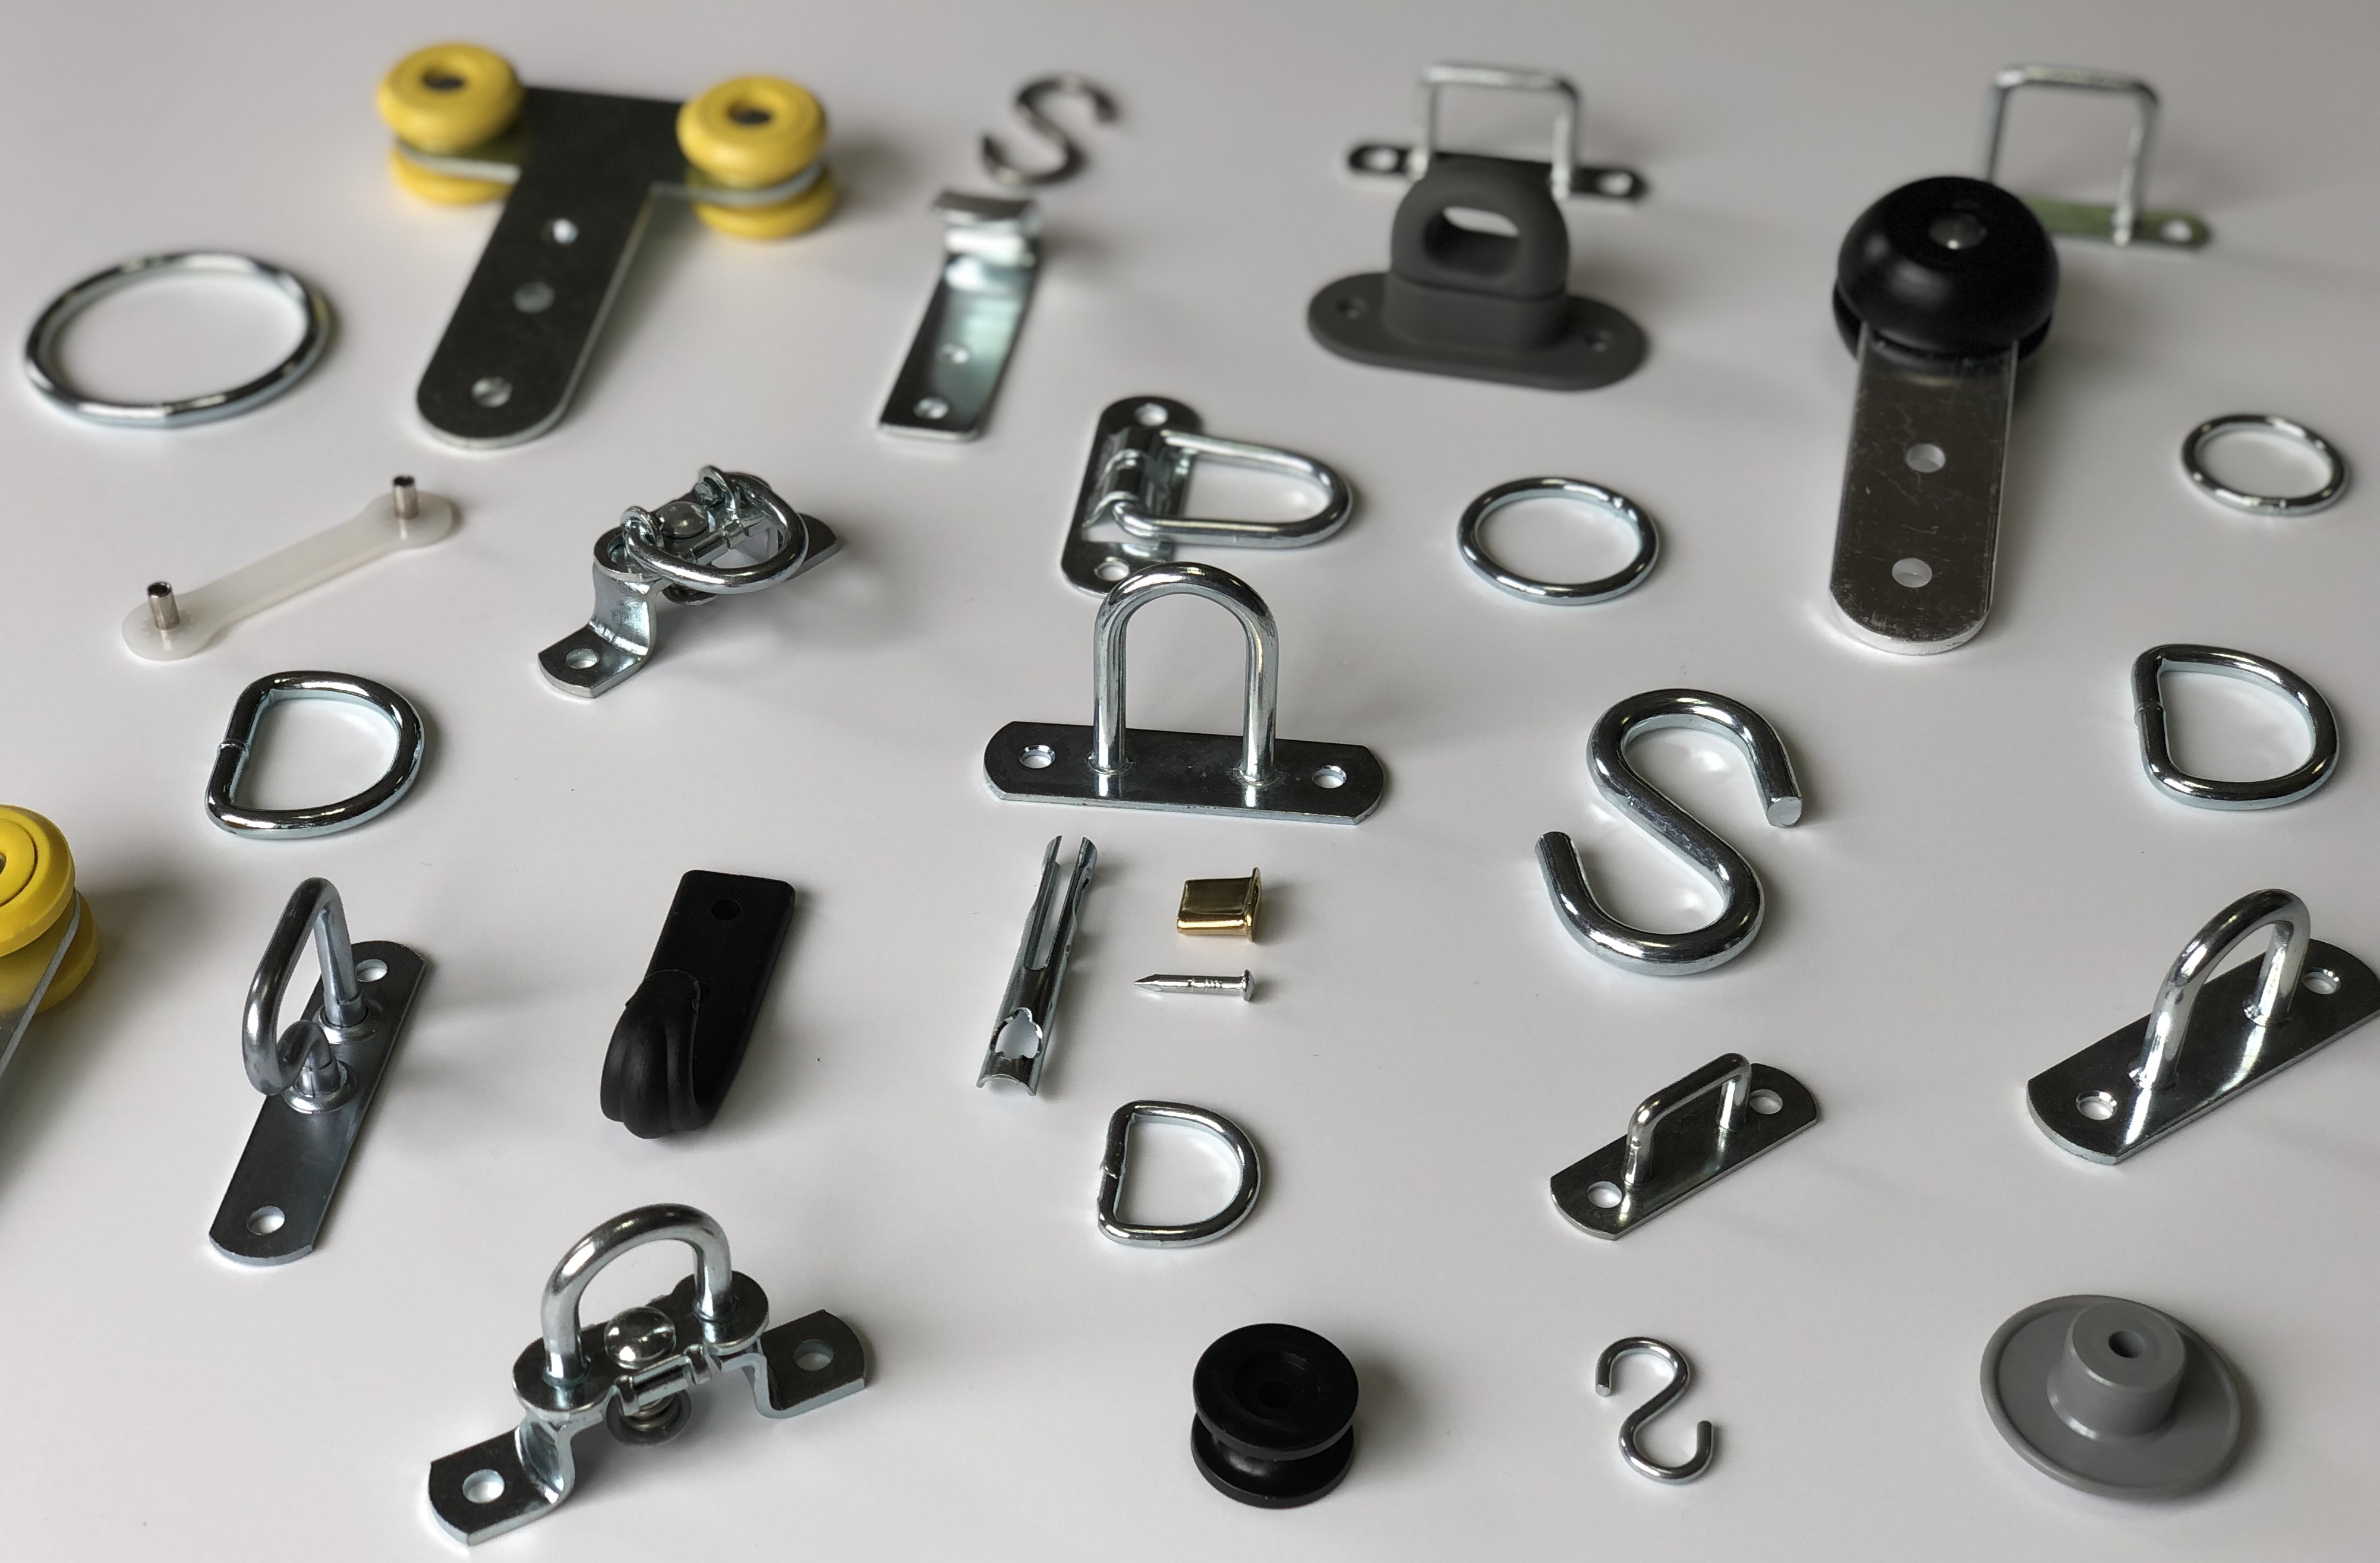 Techtextil – Exhibitors & Products - Manufacture Expedit Eurl - Eyelets and  grommets